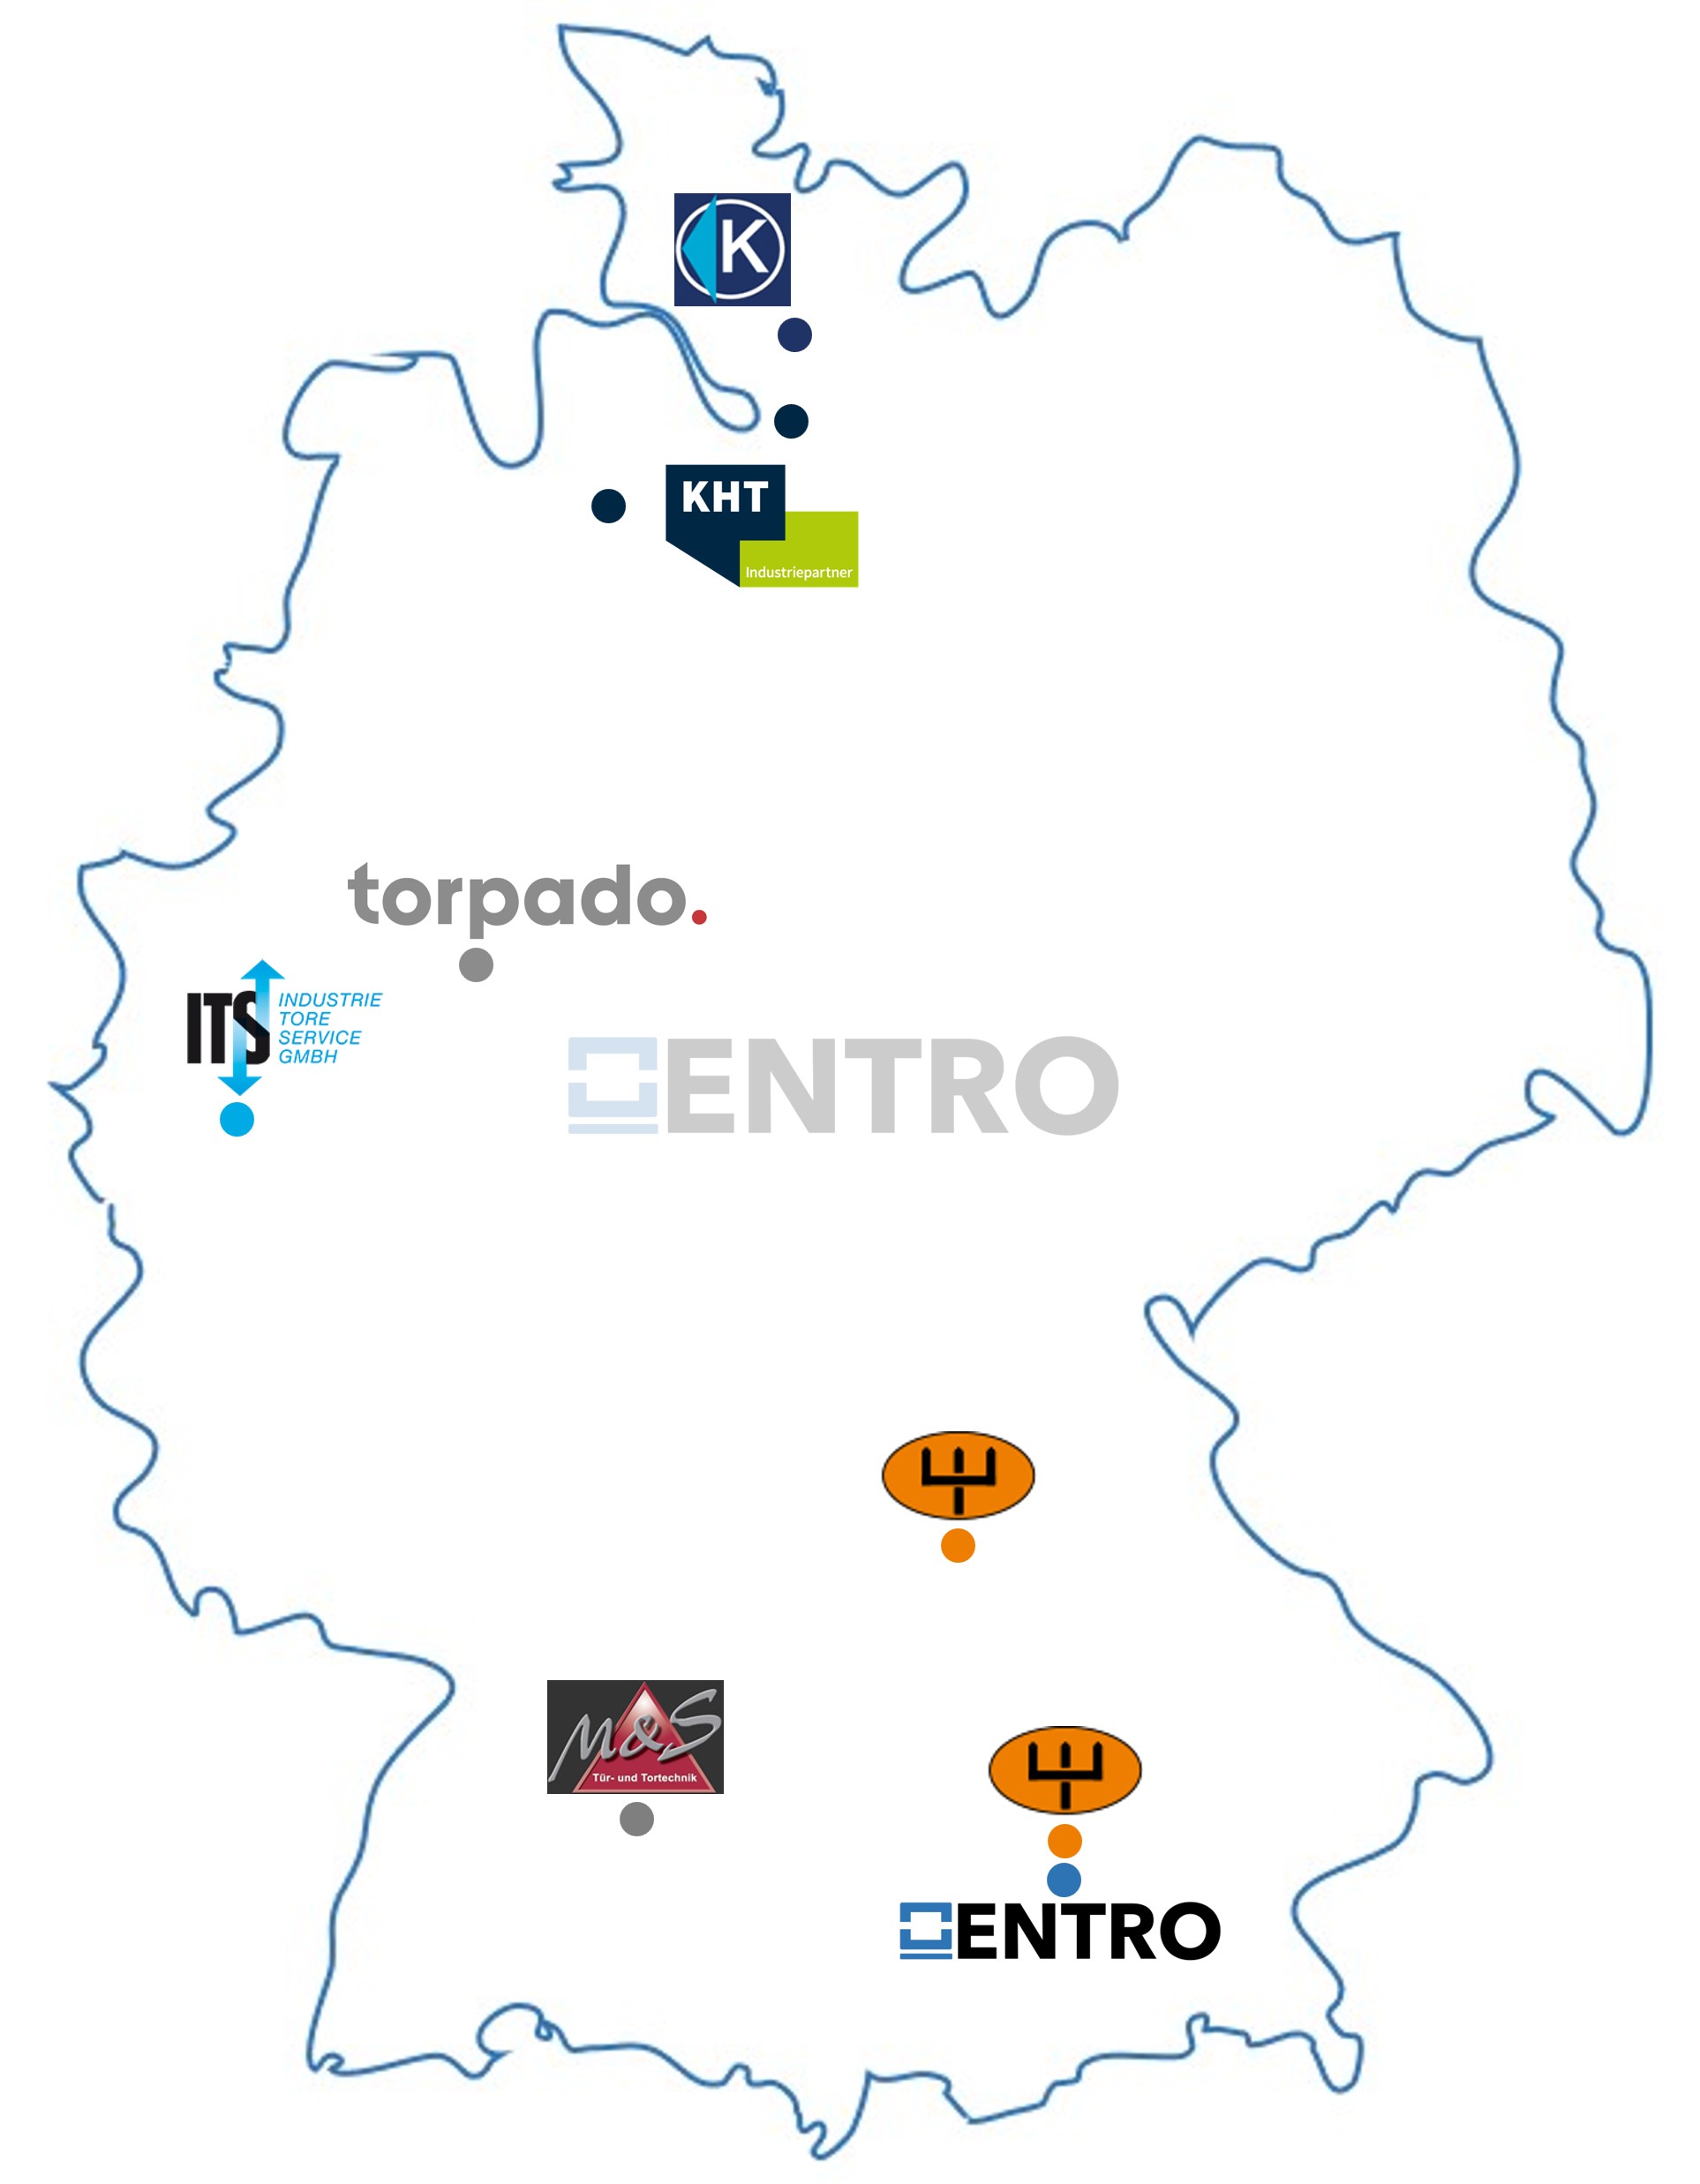 a map of Germany showing all ENTRO partner locations